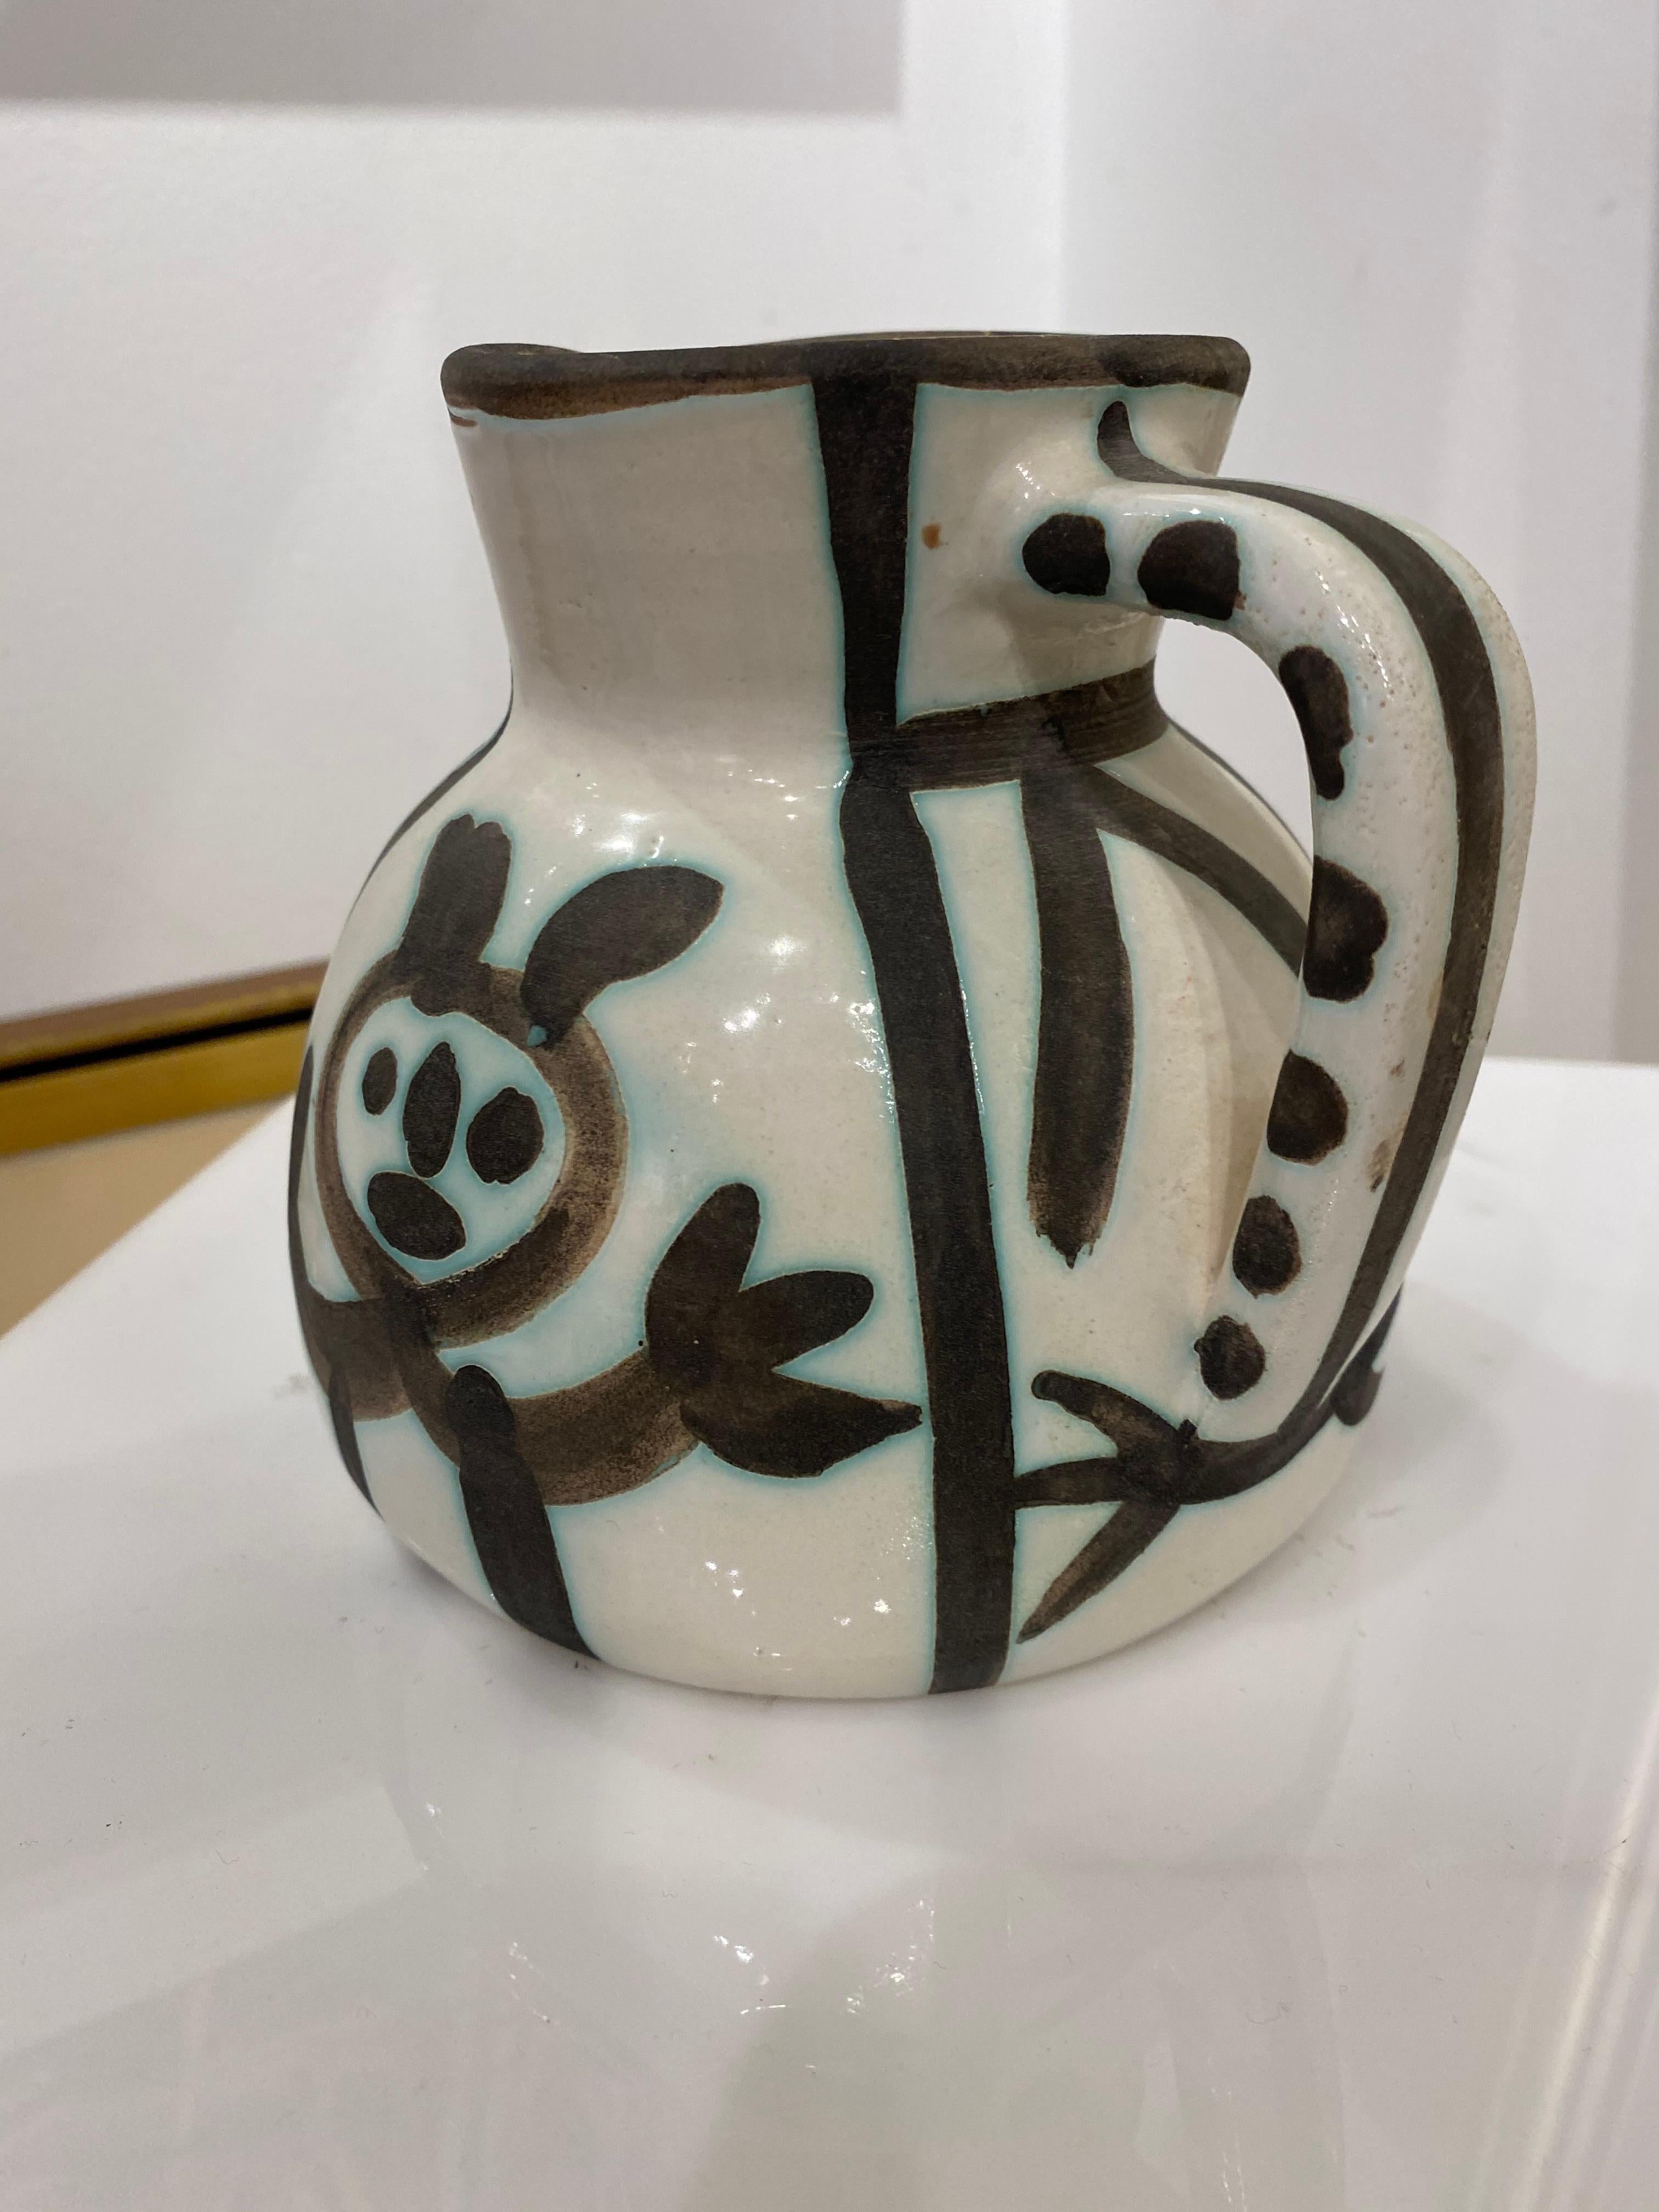 Turned Pitcher
Edition of 300
A.R. White Earthenware Clay, Oxidized Paraffin Decoration, White Enamel, Black
5.12 x 5.71  inches